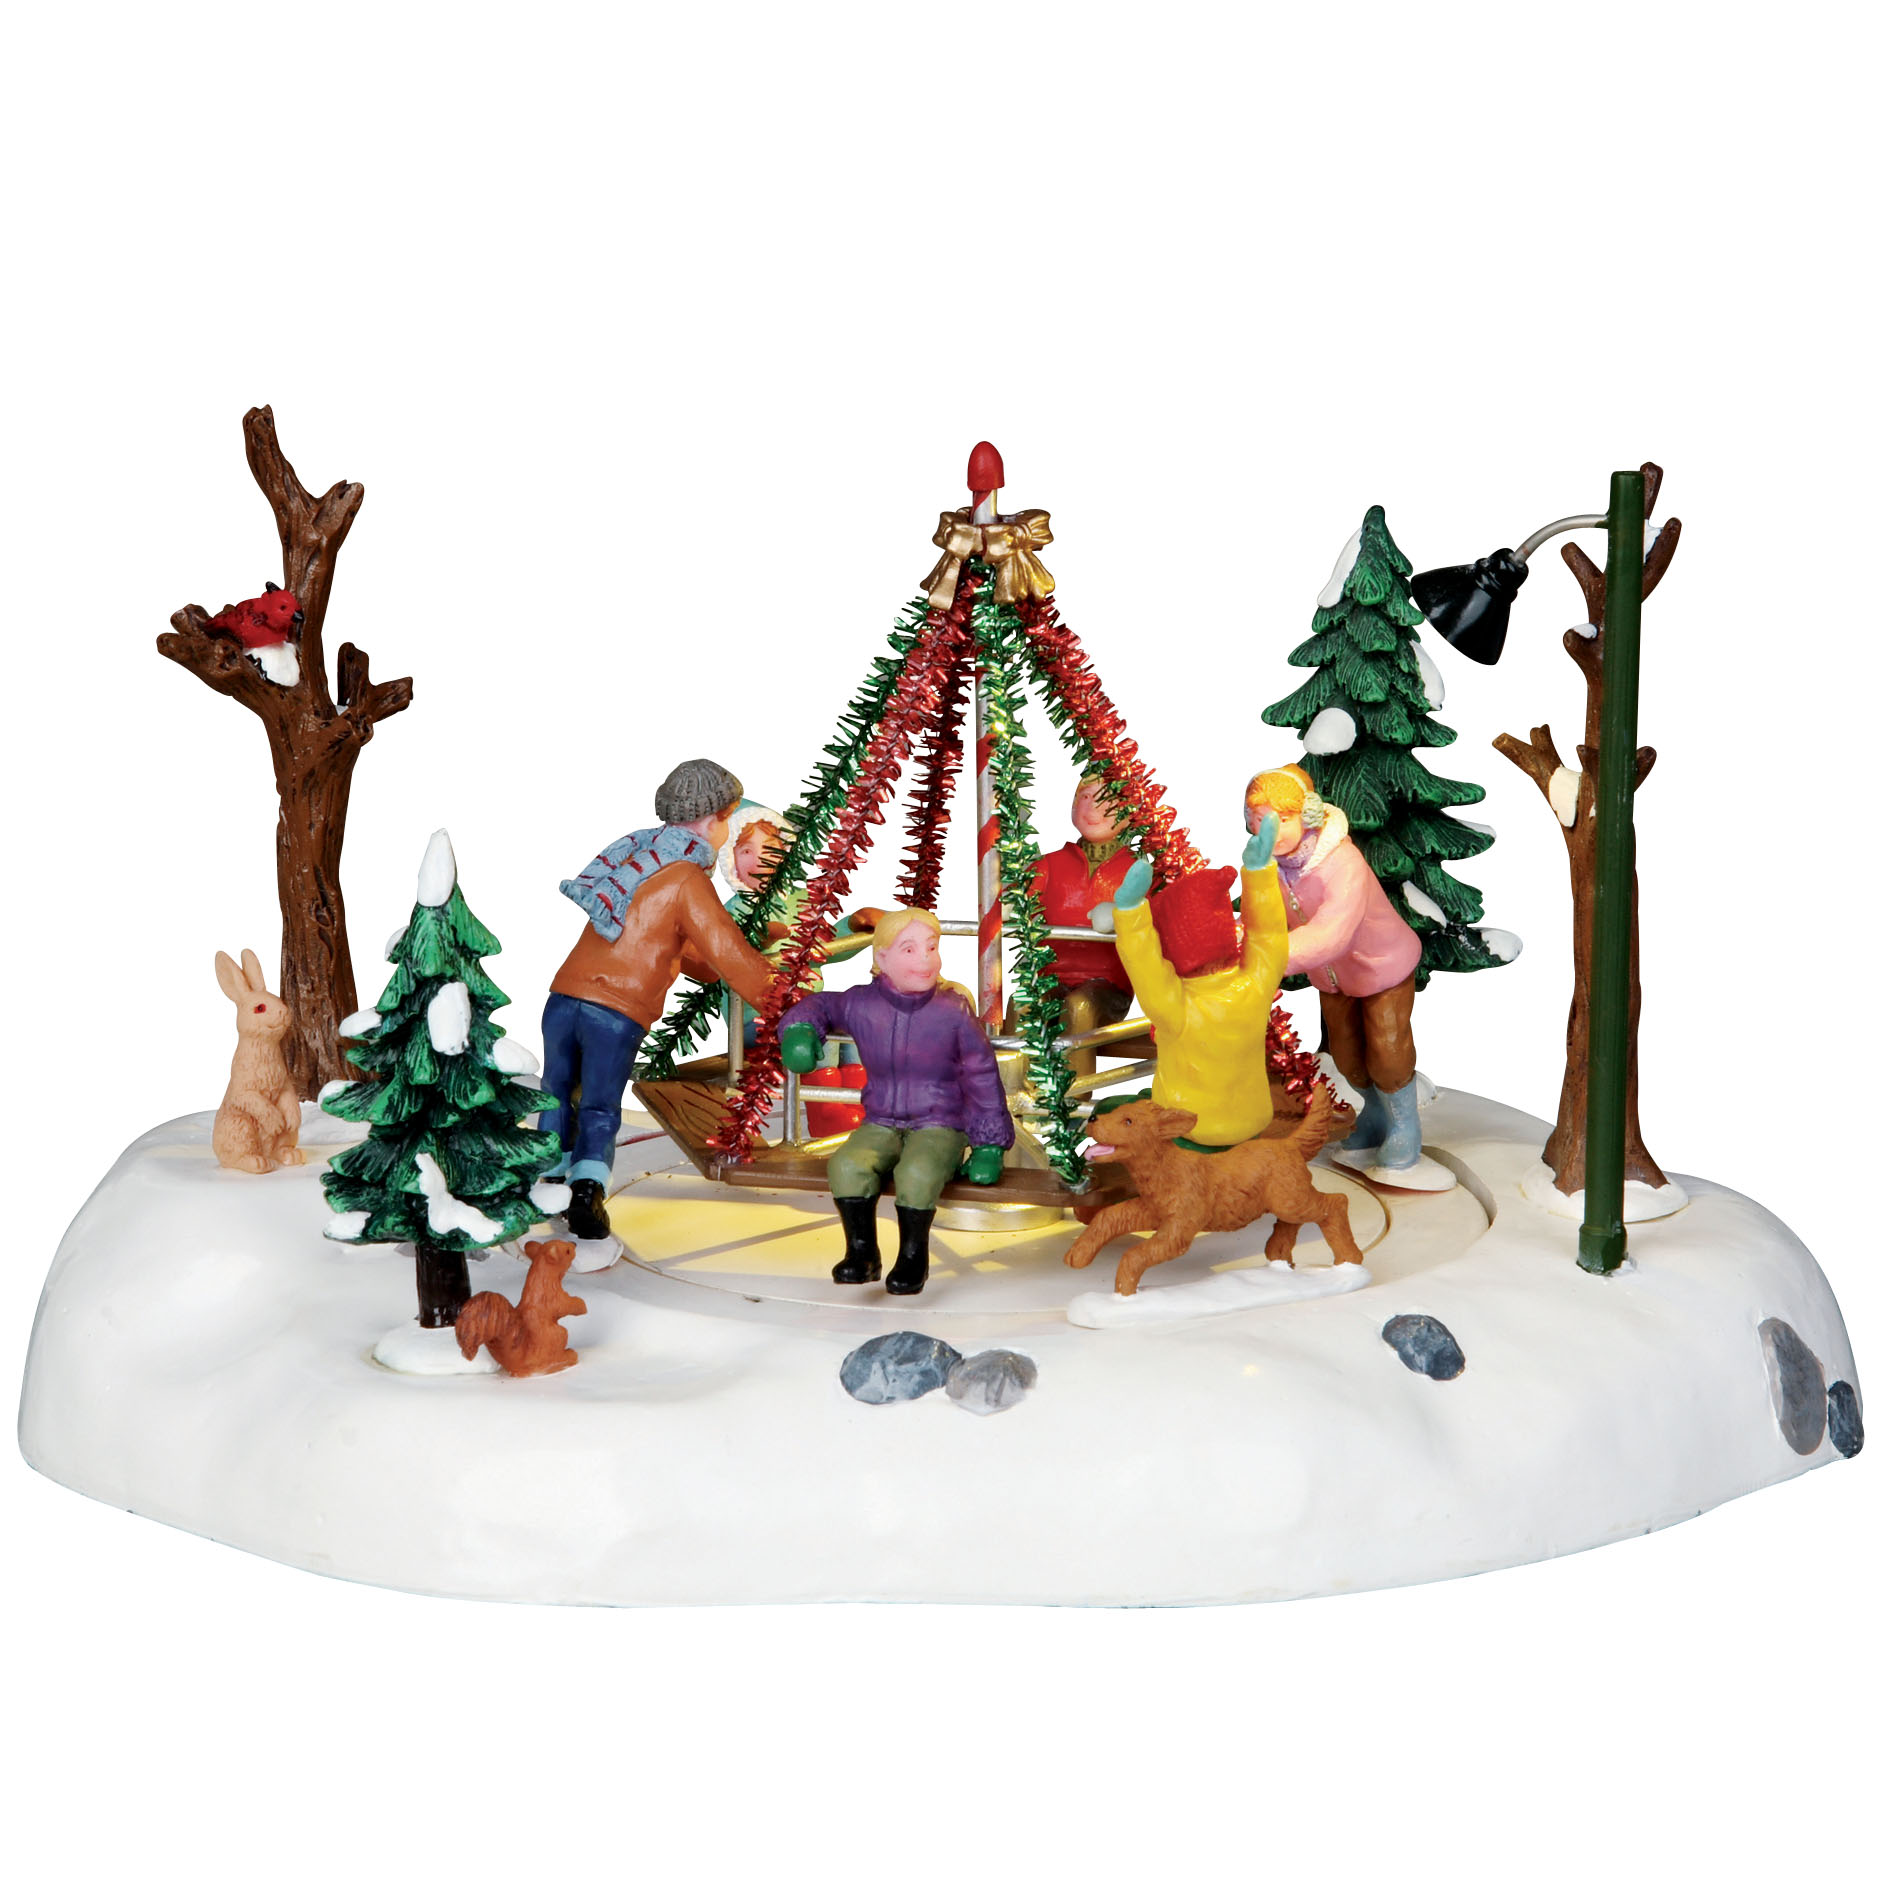 Lemax Village Collection Christmas Village Accessory, Holiday Merry-Go-Round, B/O (4.5V)